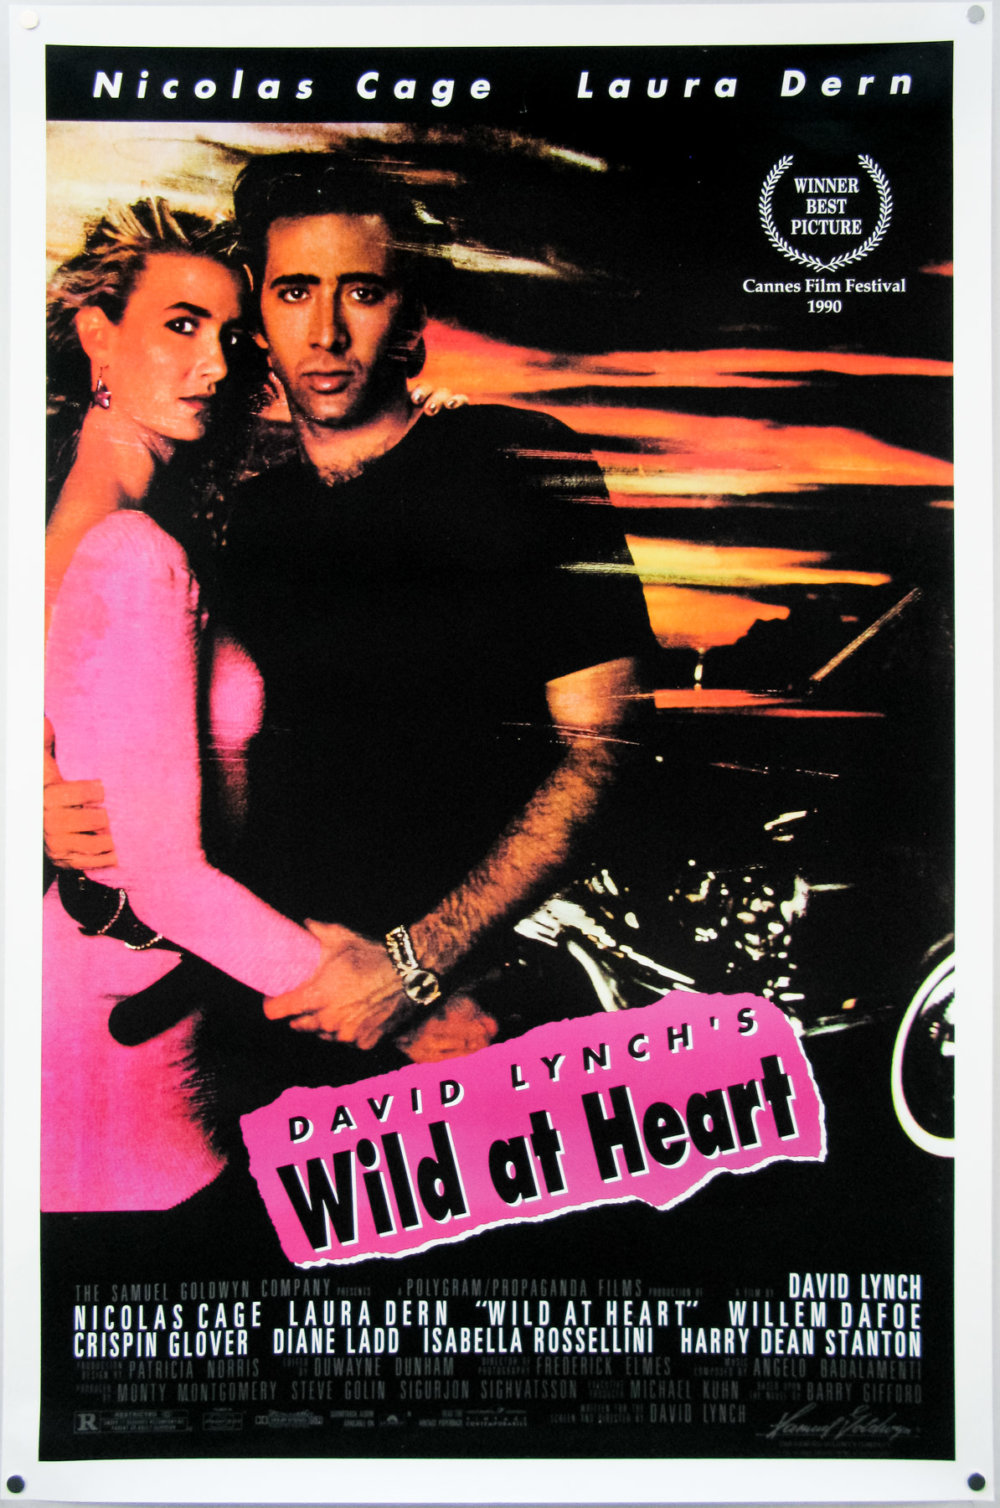 soundtrack wild at heart